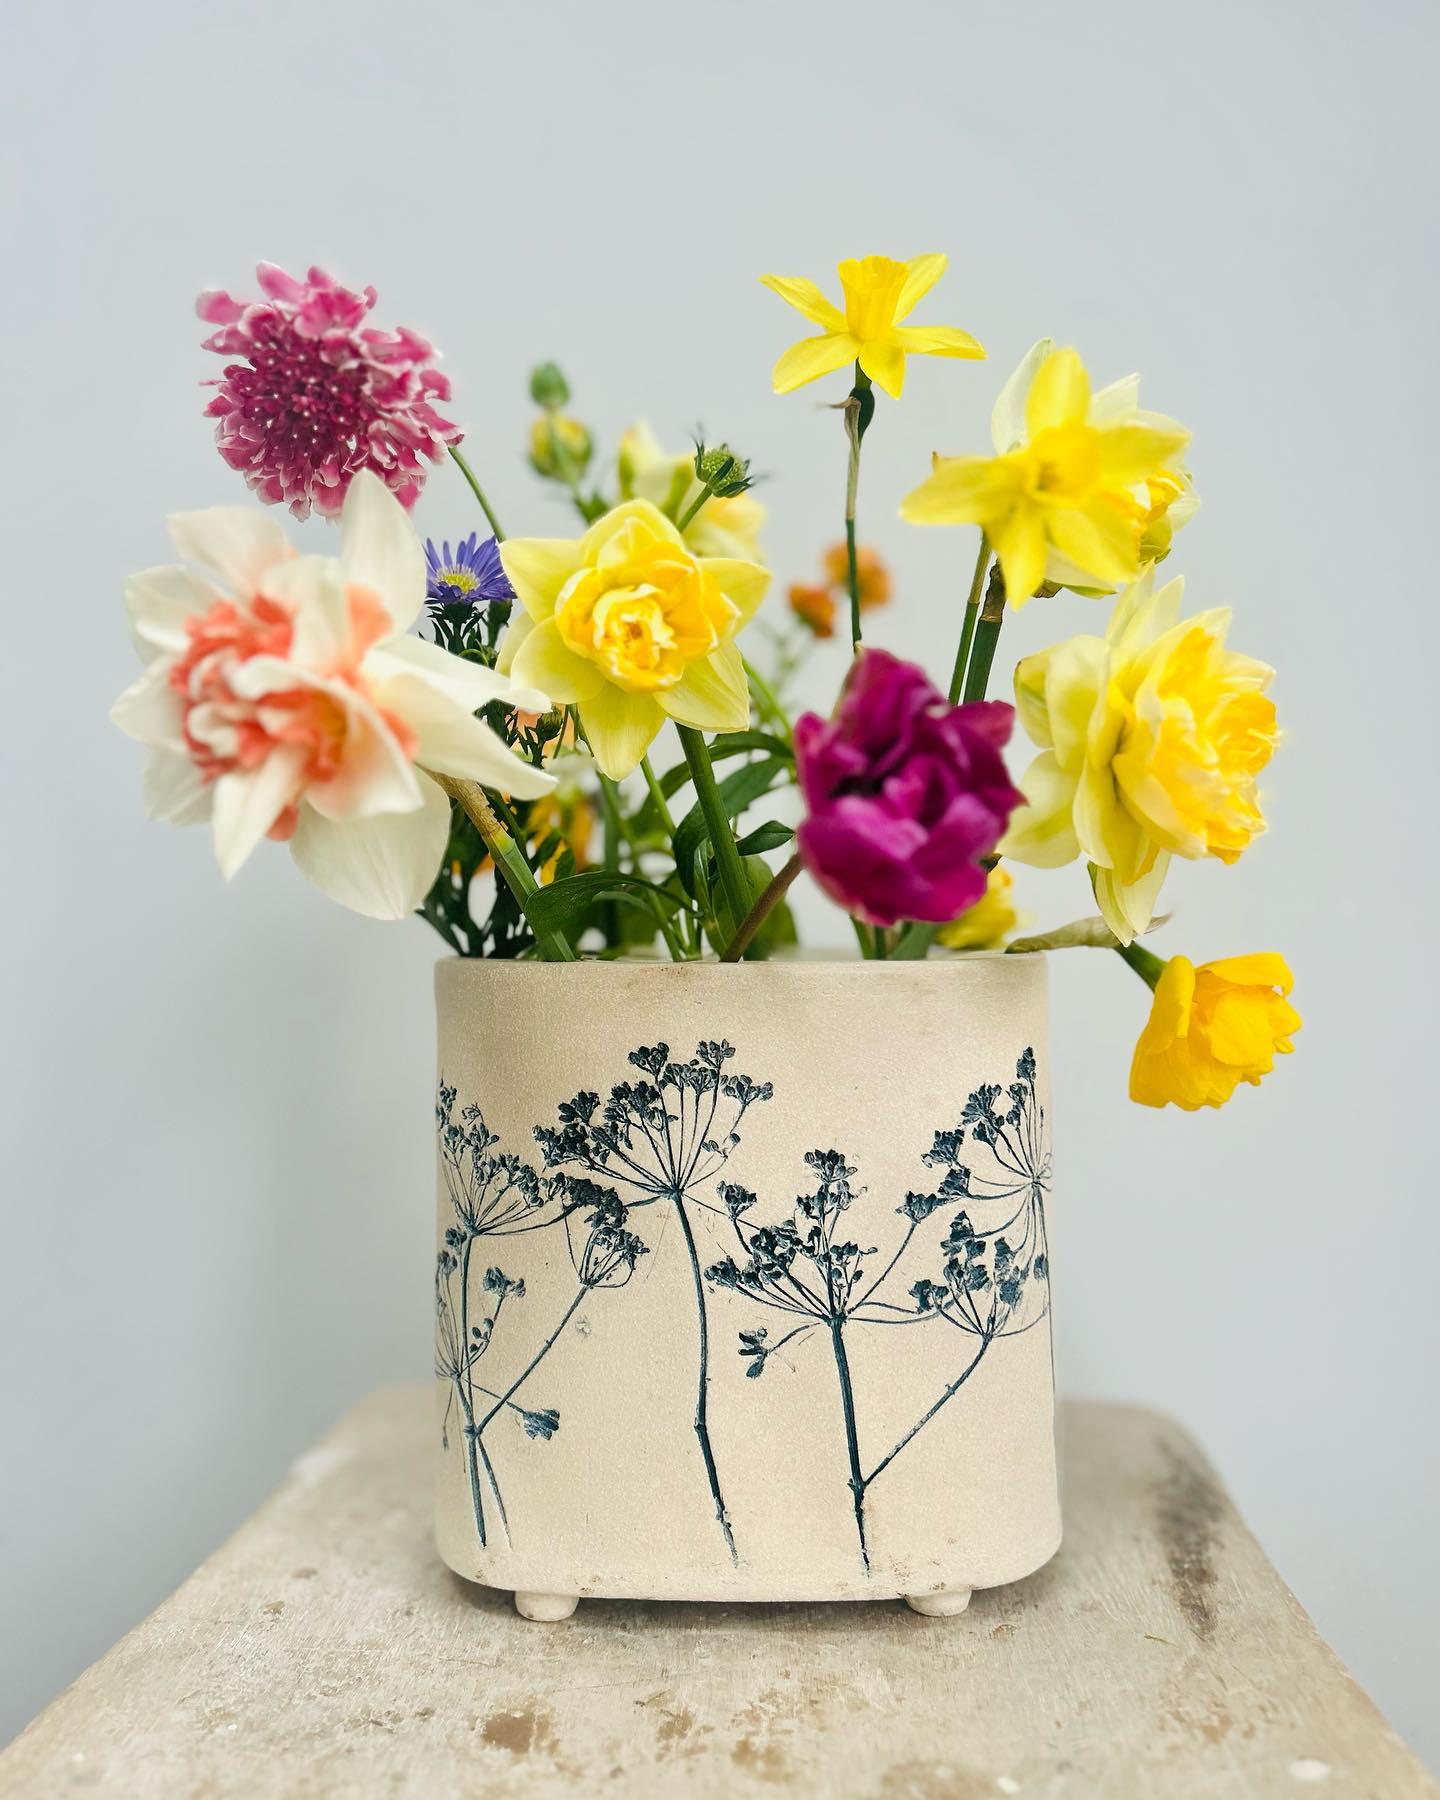 uploads/images/Vase With Flowers